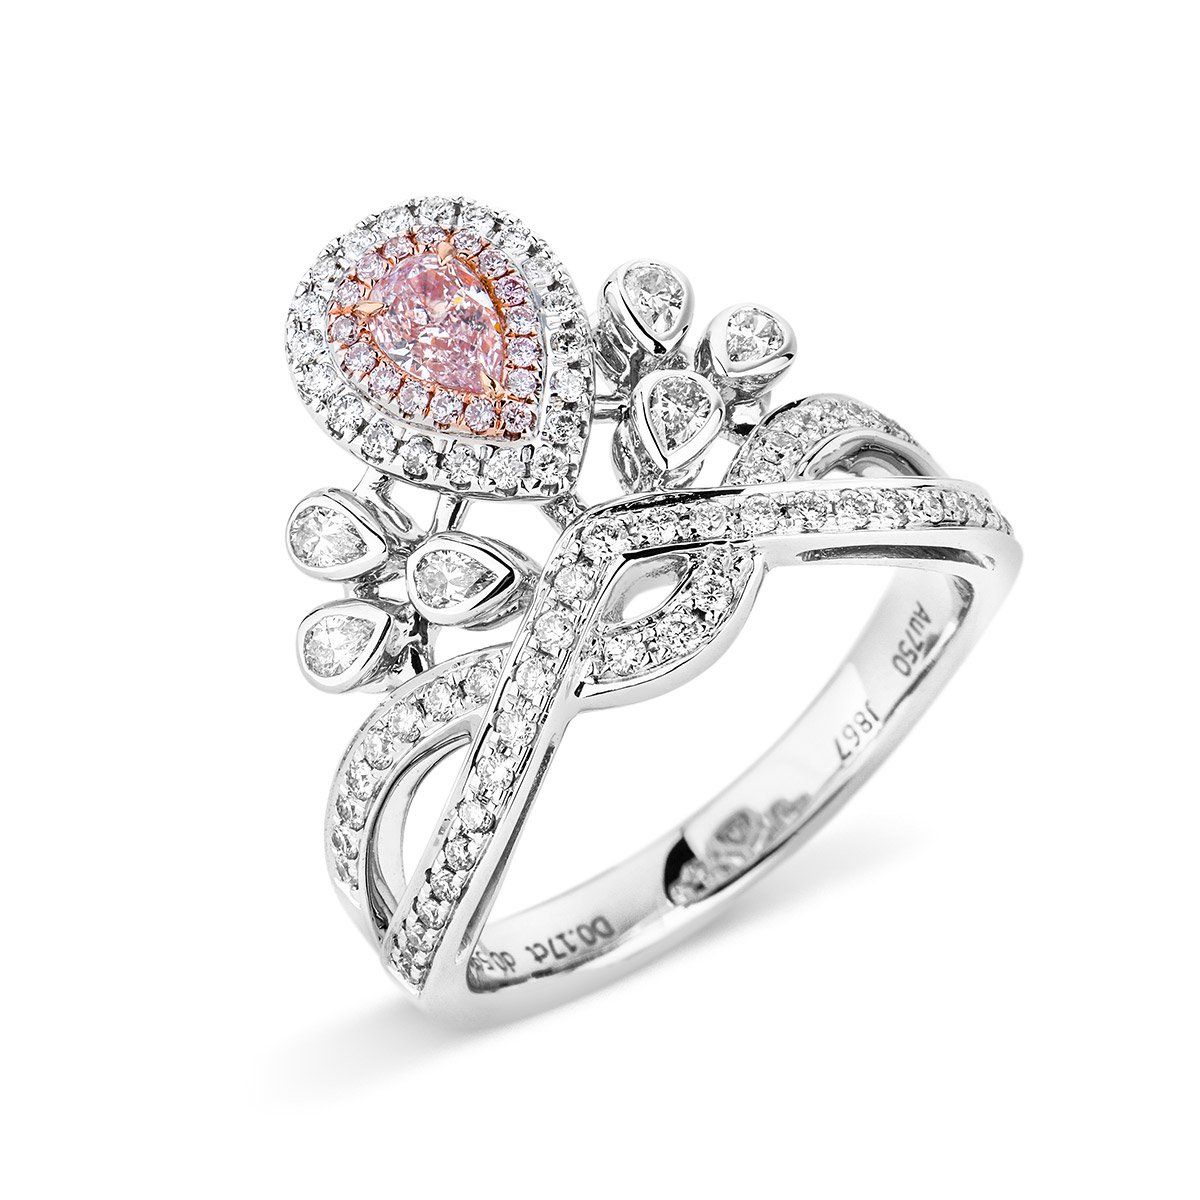 Faint Pink Diamond Ring, 0.17 Ct. (0.77 Ct. TW), Pear shape, GIA Certified, 5182030998